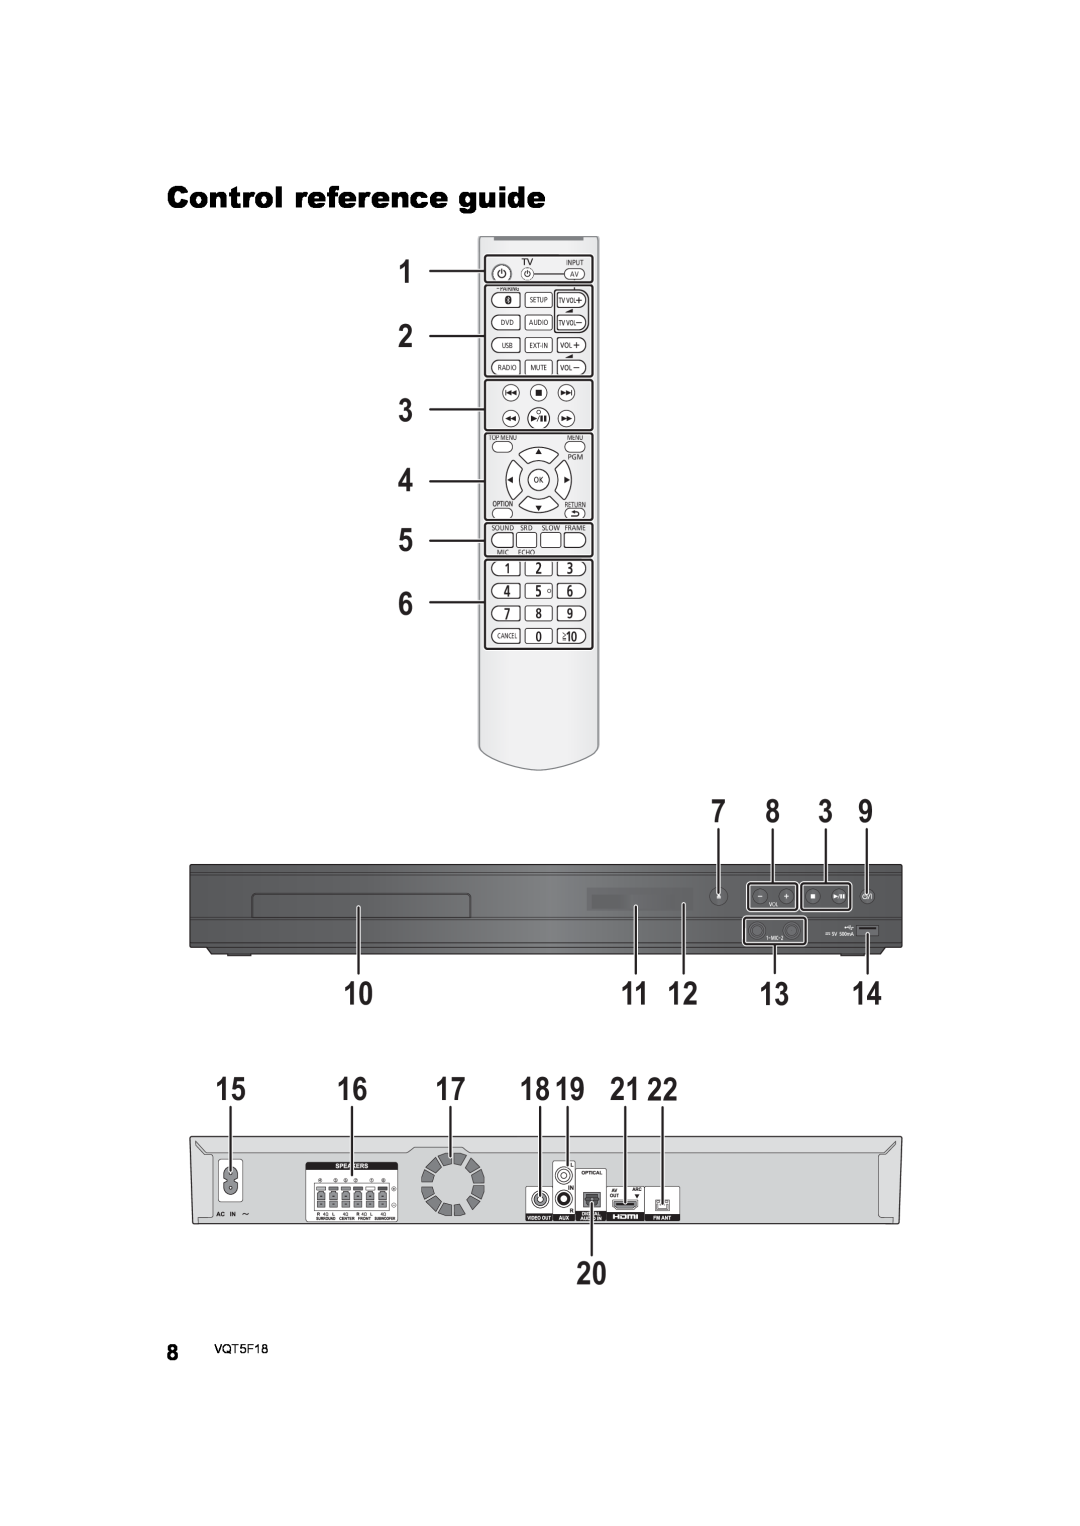 Panasonic SC-XH385, SC-XH333 owner manual Control reference guide, 8 VQT5F18 